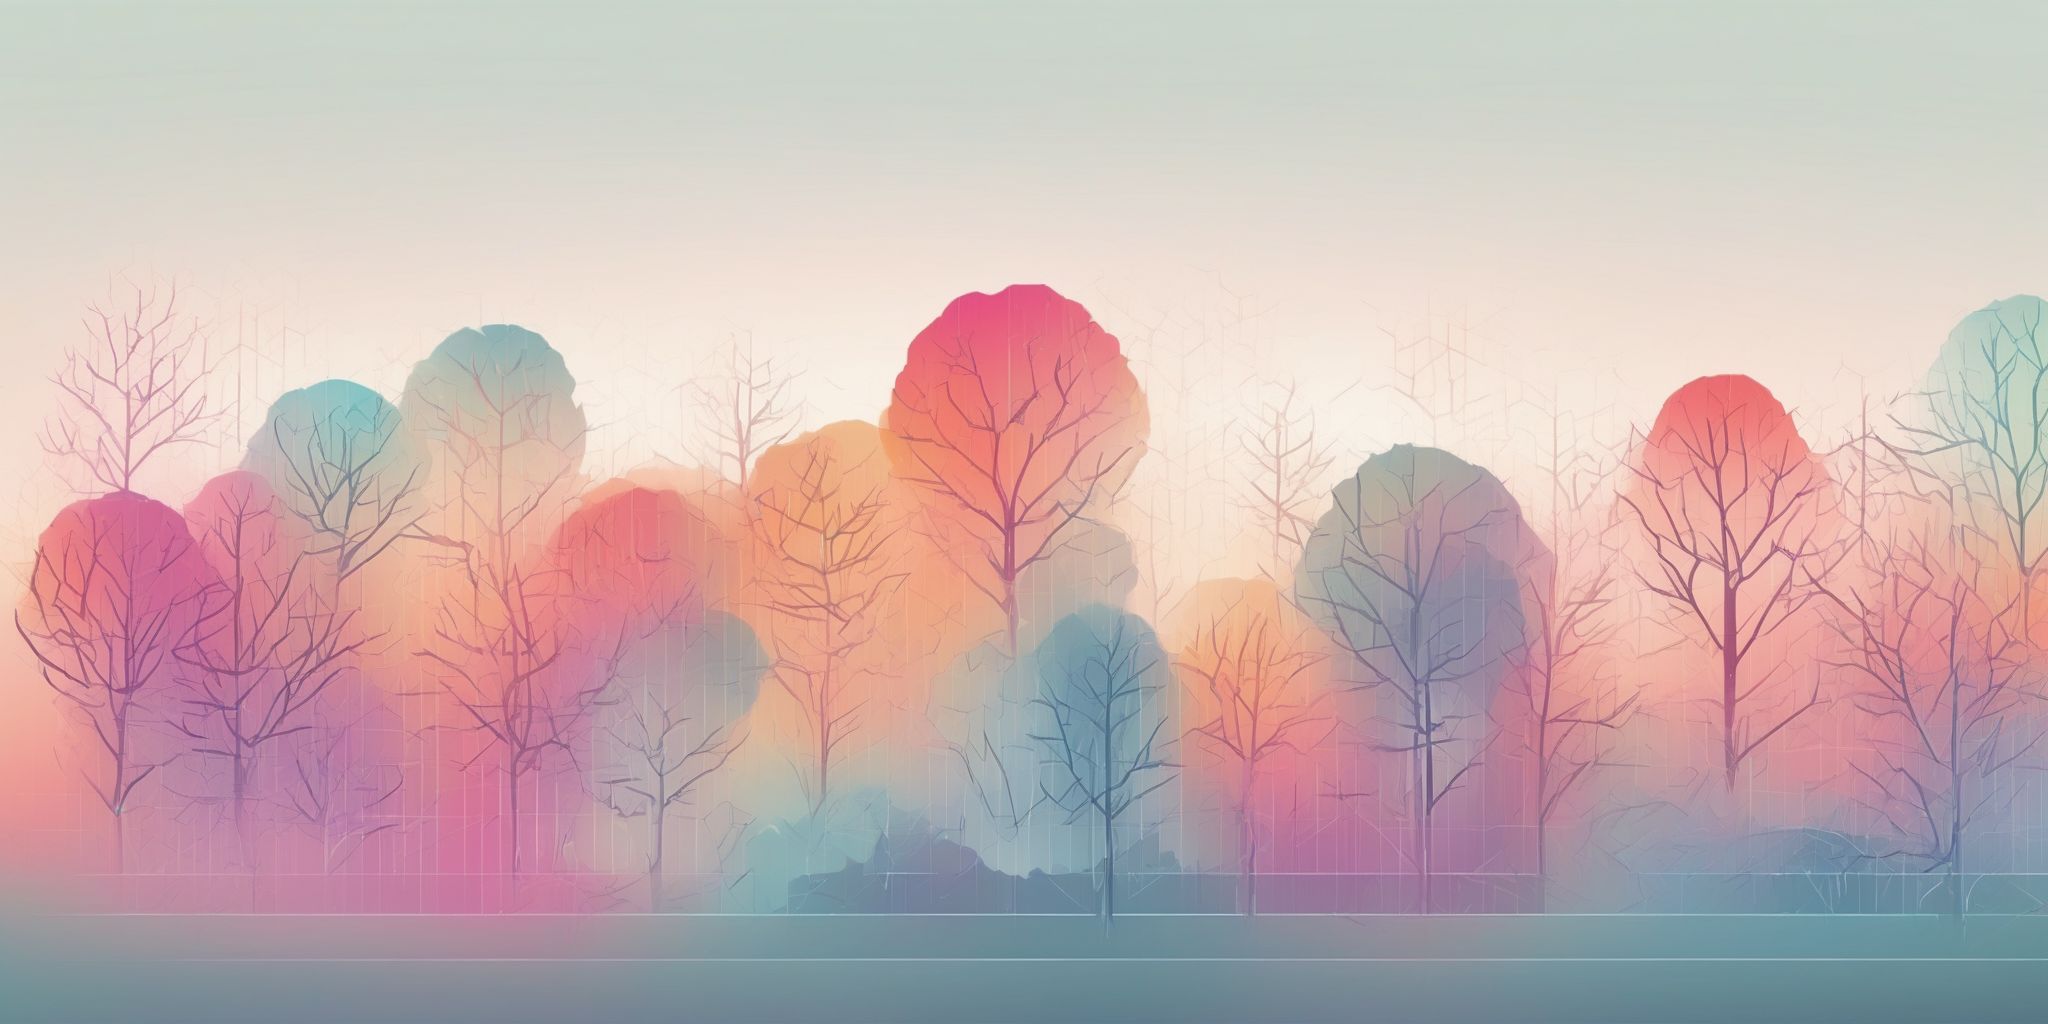 filter in illustration style with gradients and white background